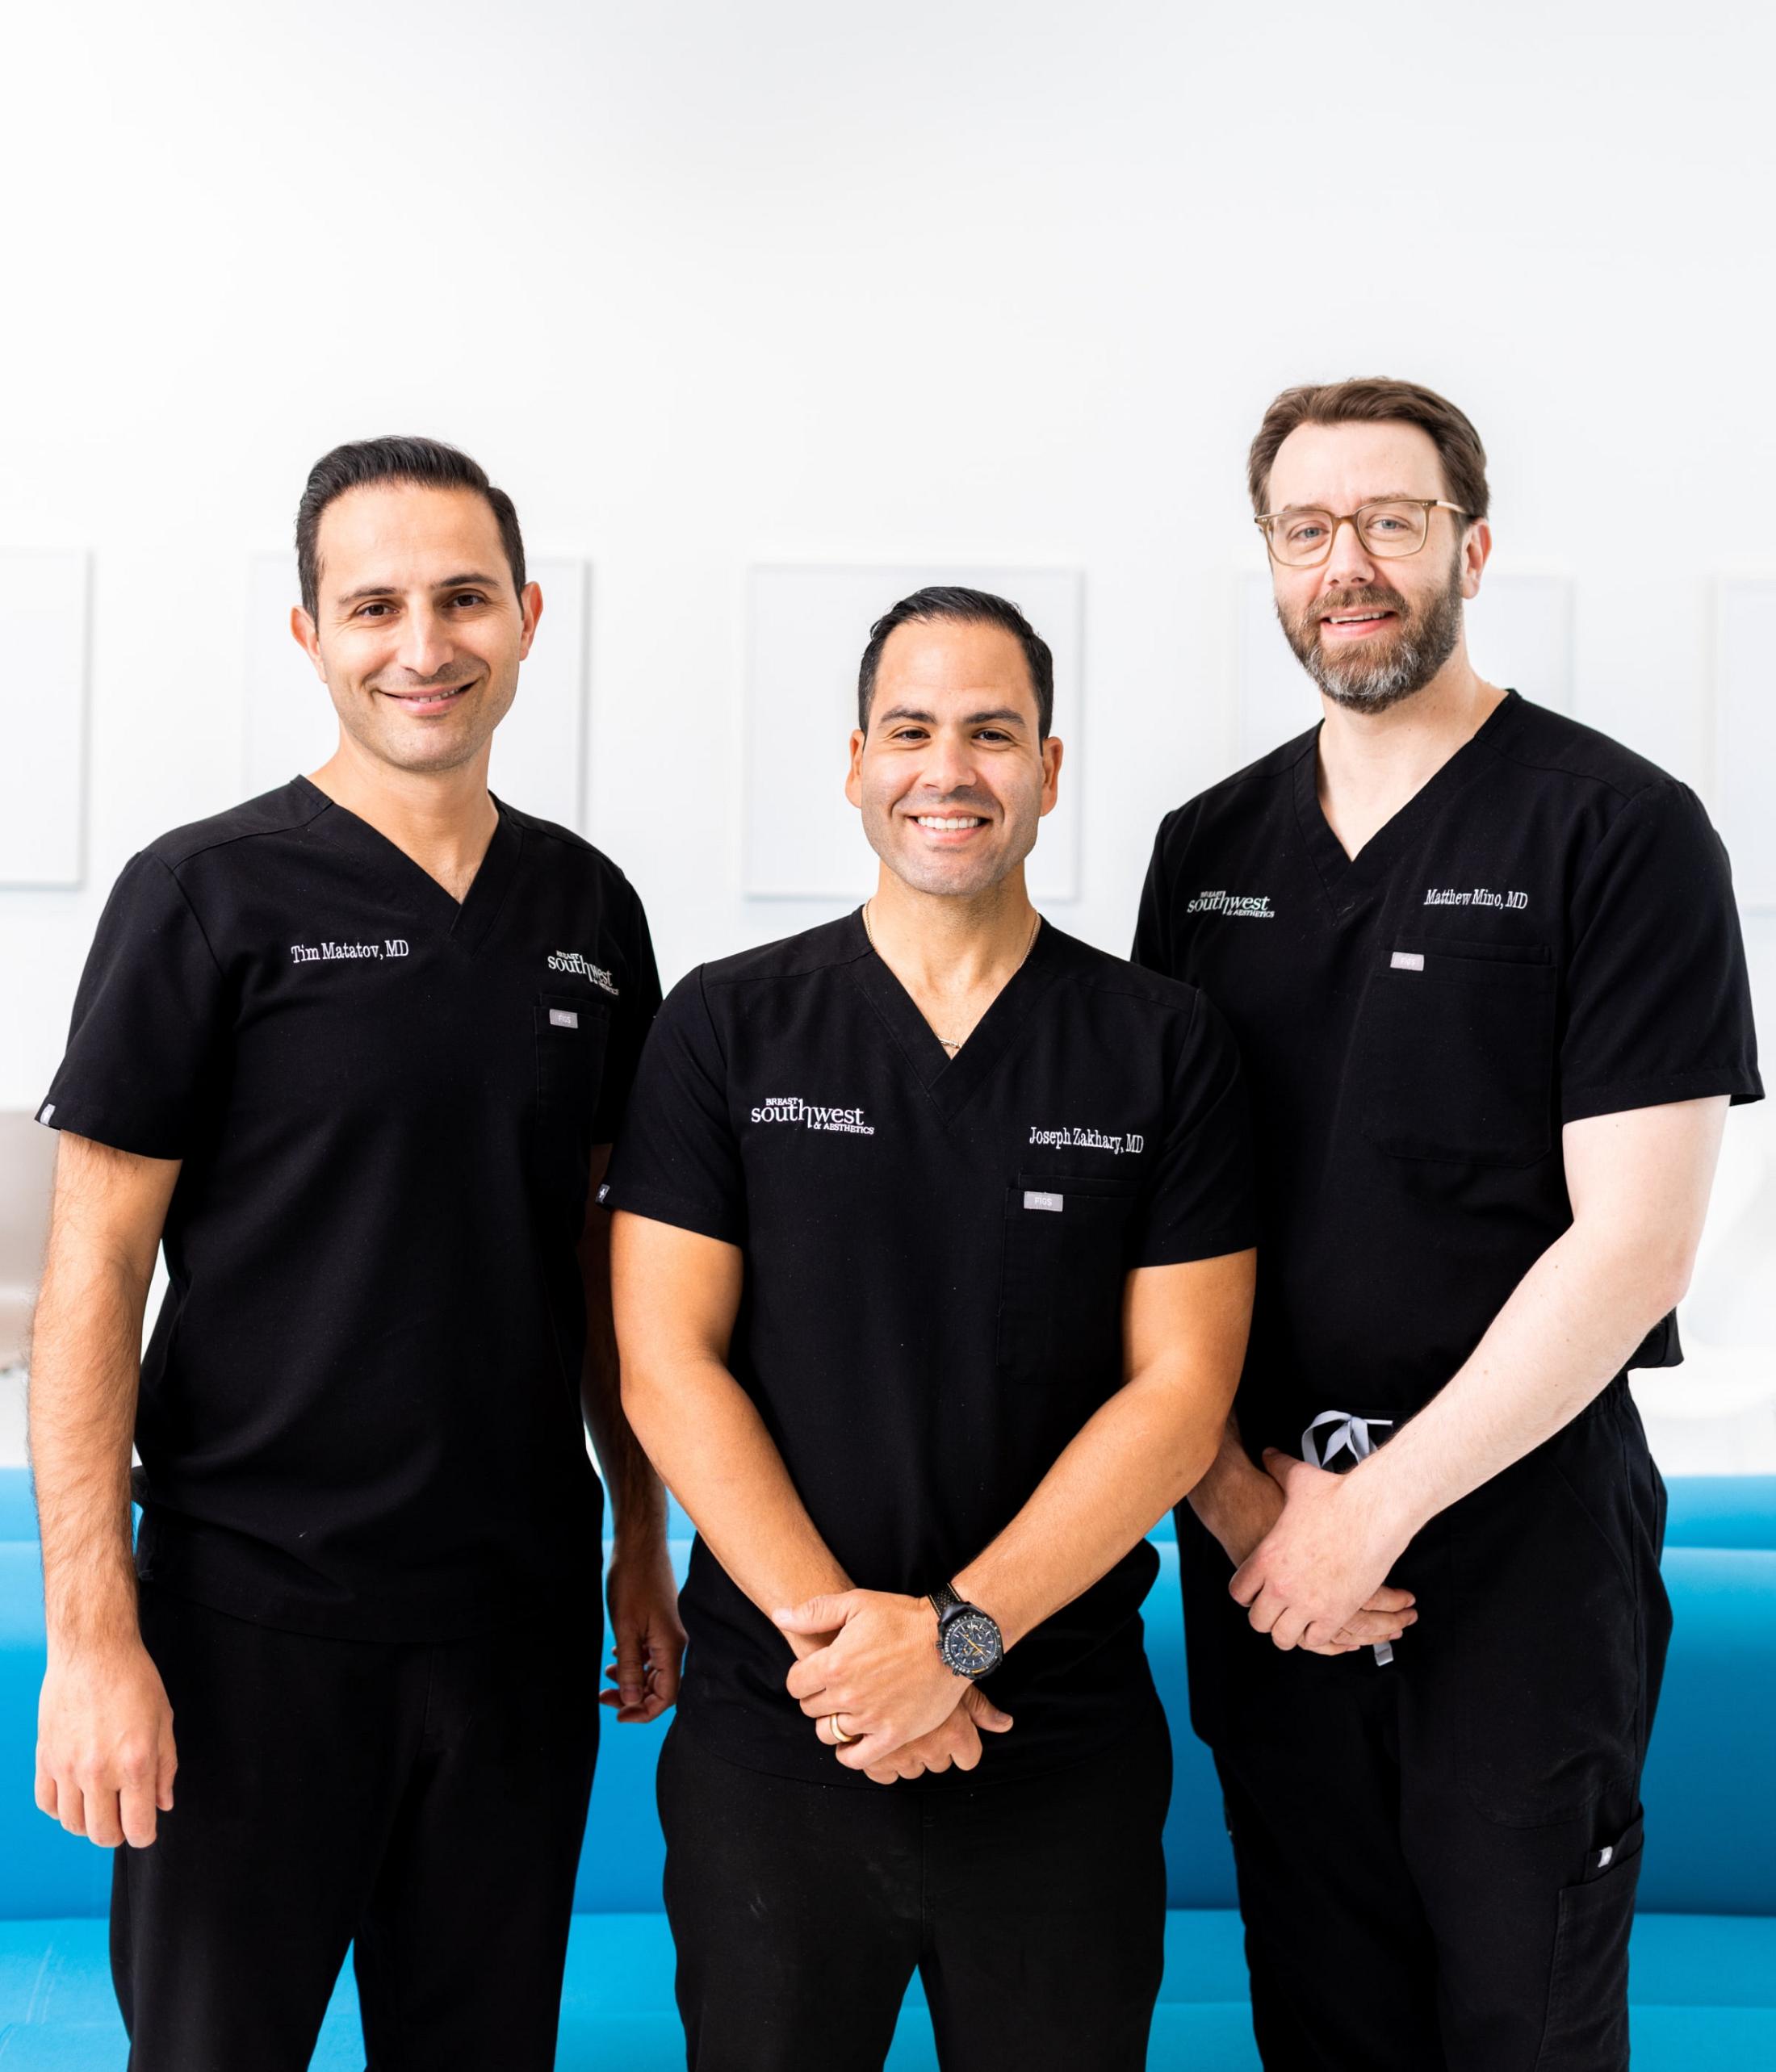 Chandler Breast Surgery Experts Dr. Matatov, Dr. Zakhary, and Dr. Mino